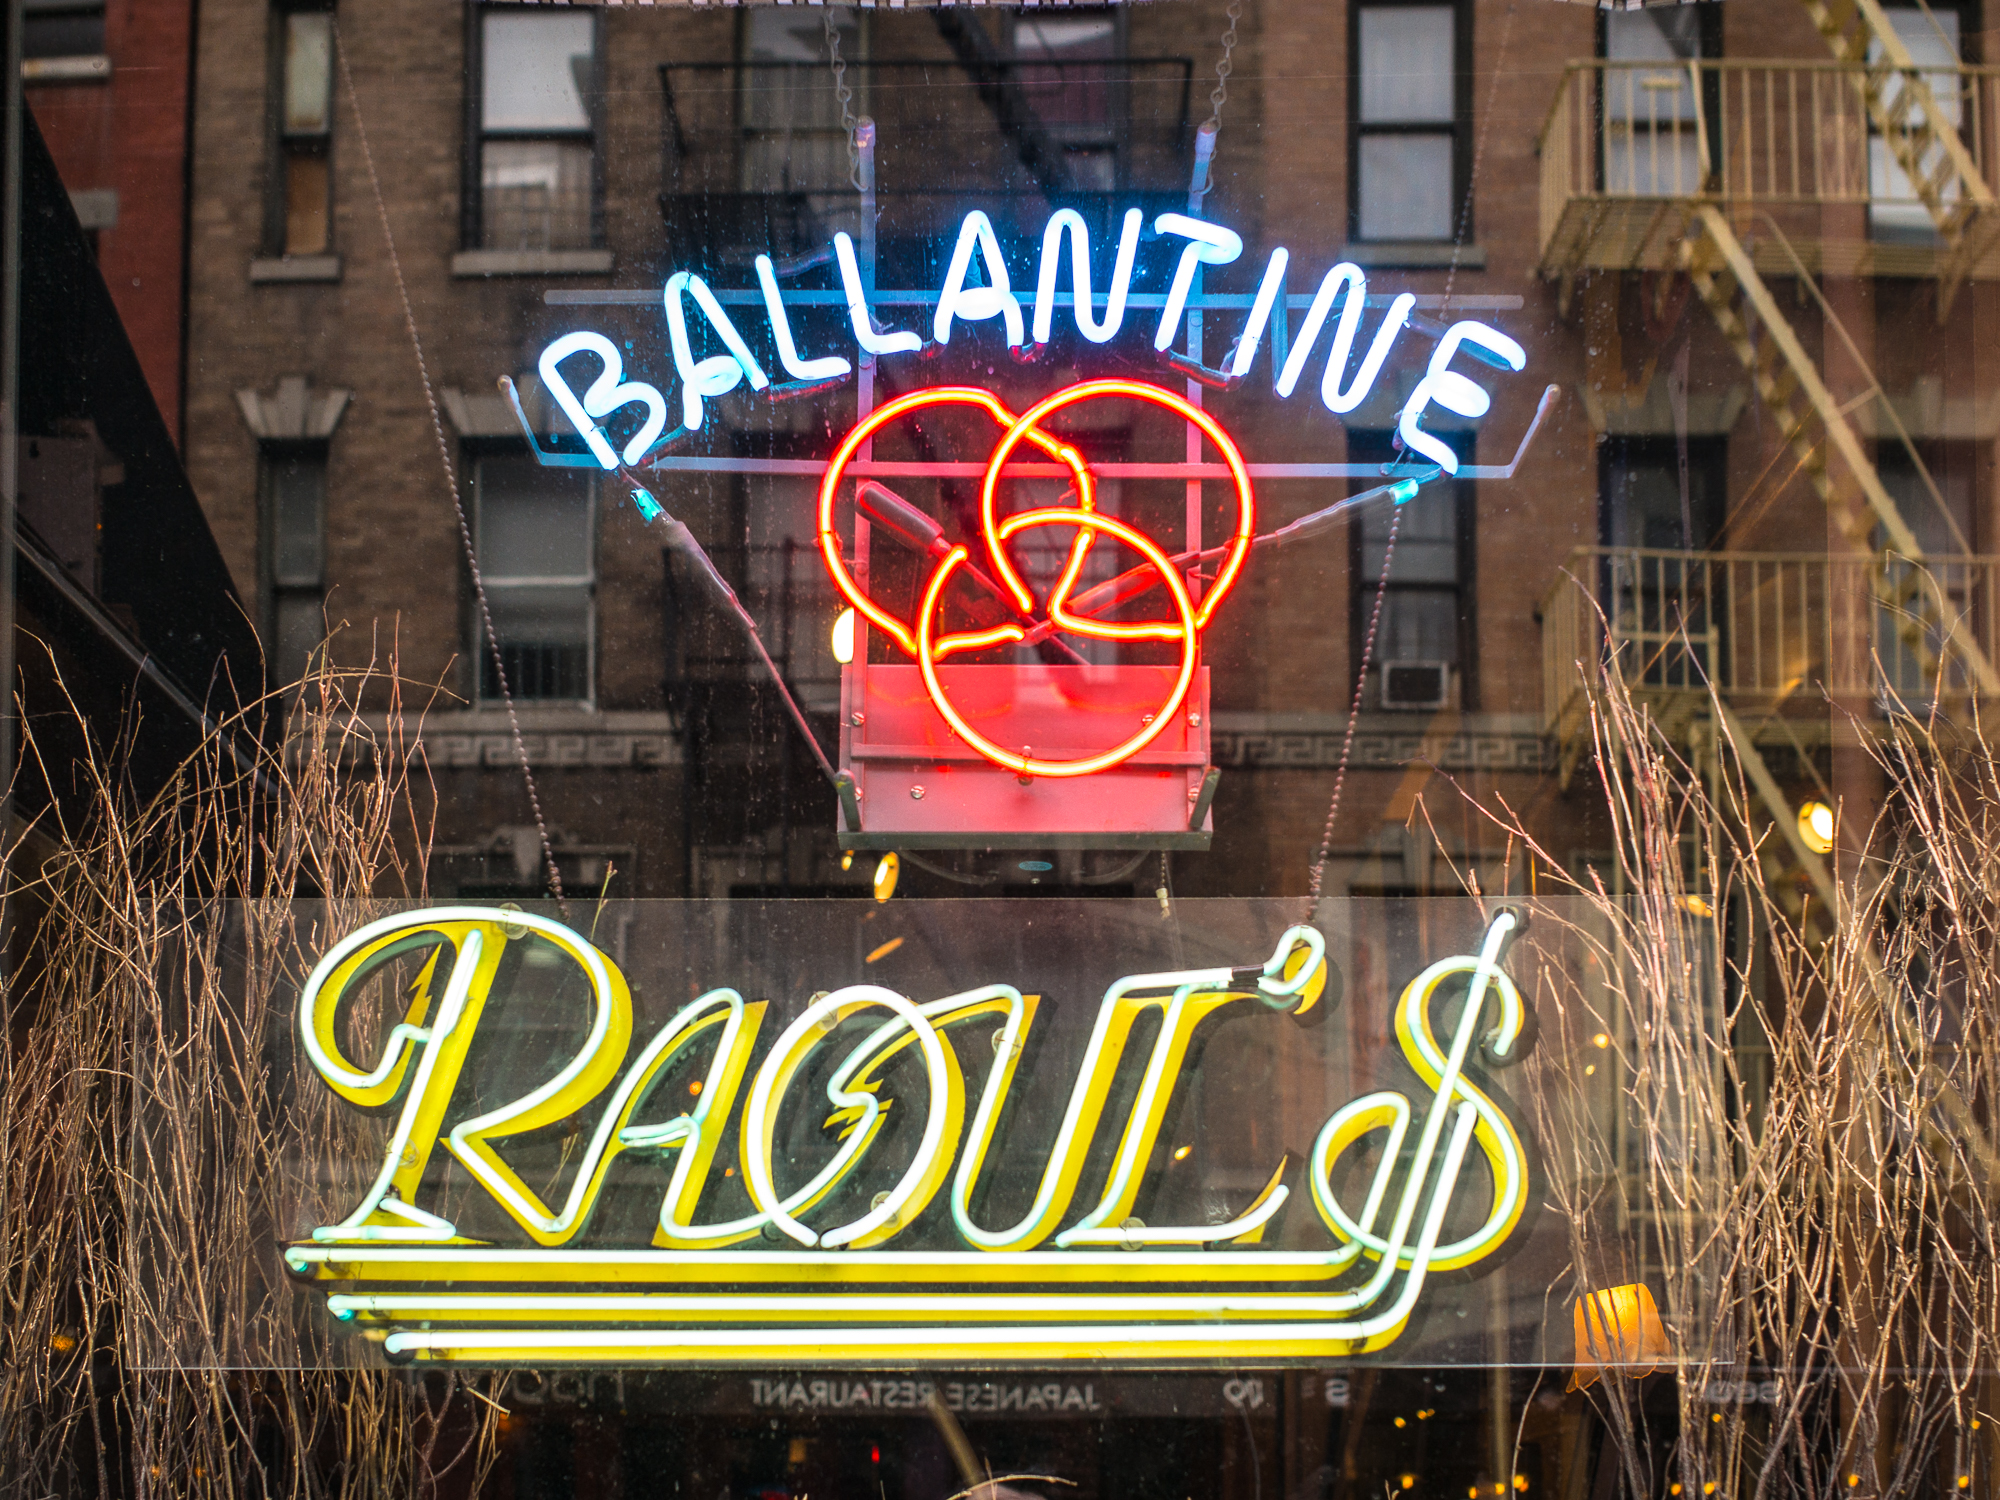 A neon sign with the words “Ballantine Raoul’s” gleams on a glass window.